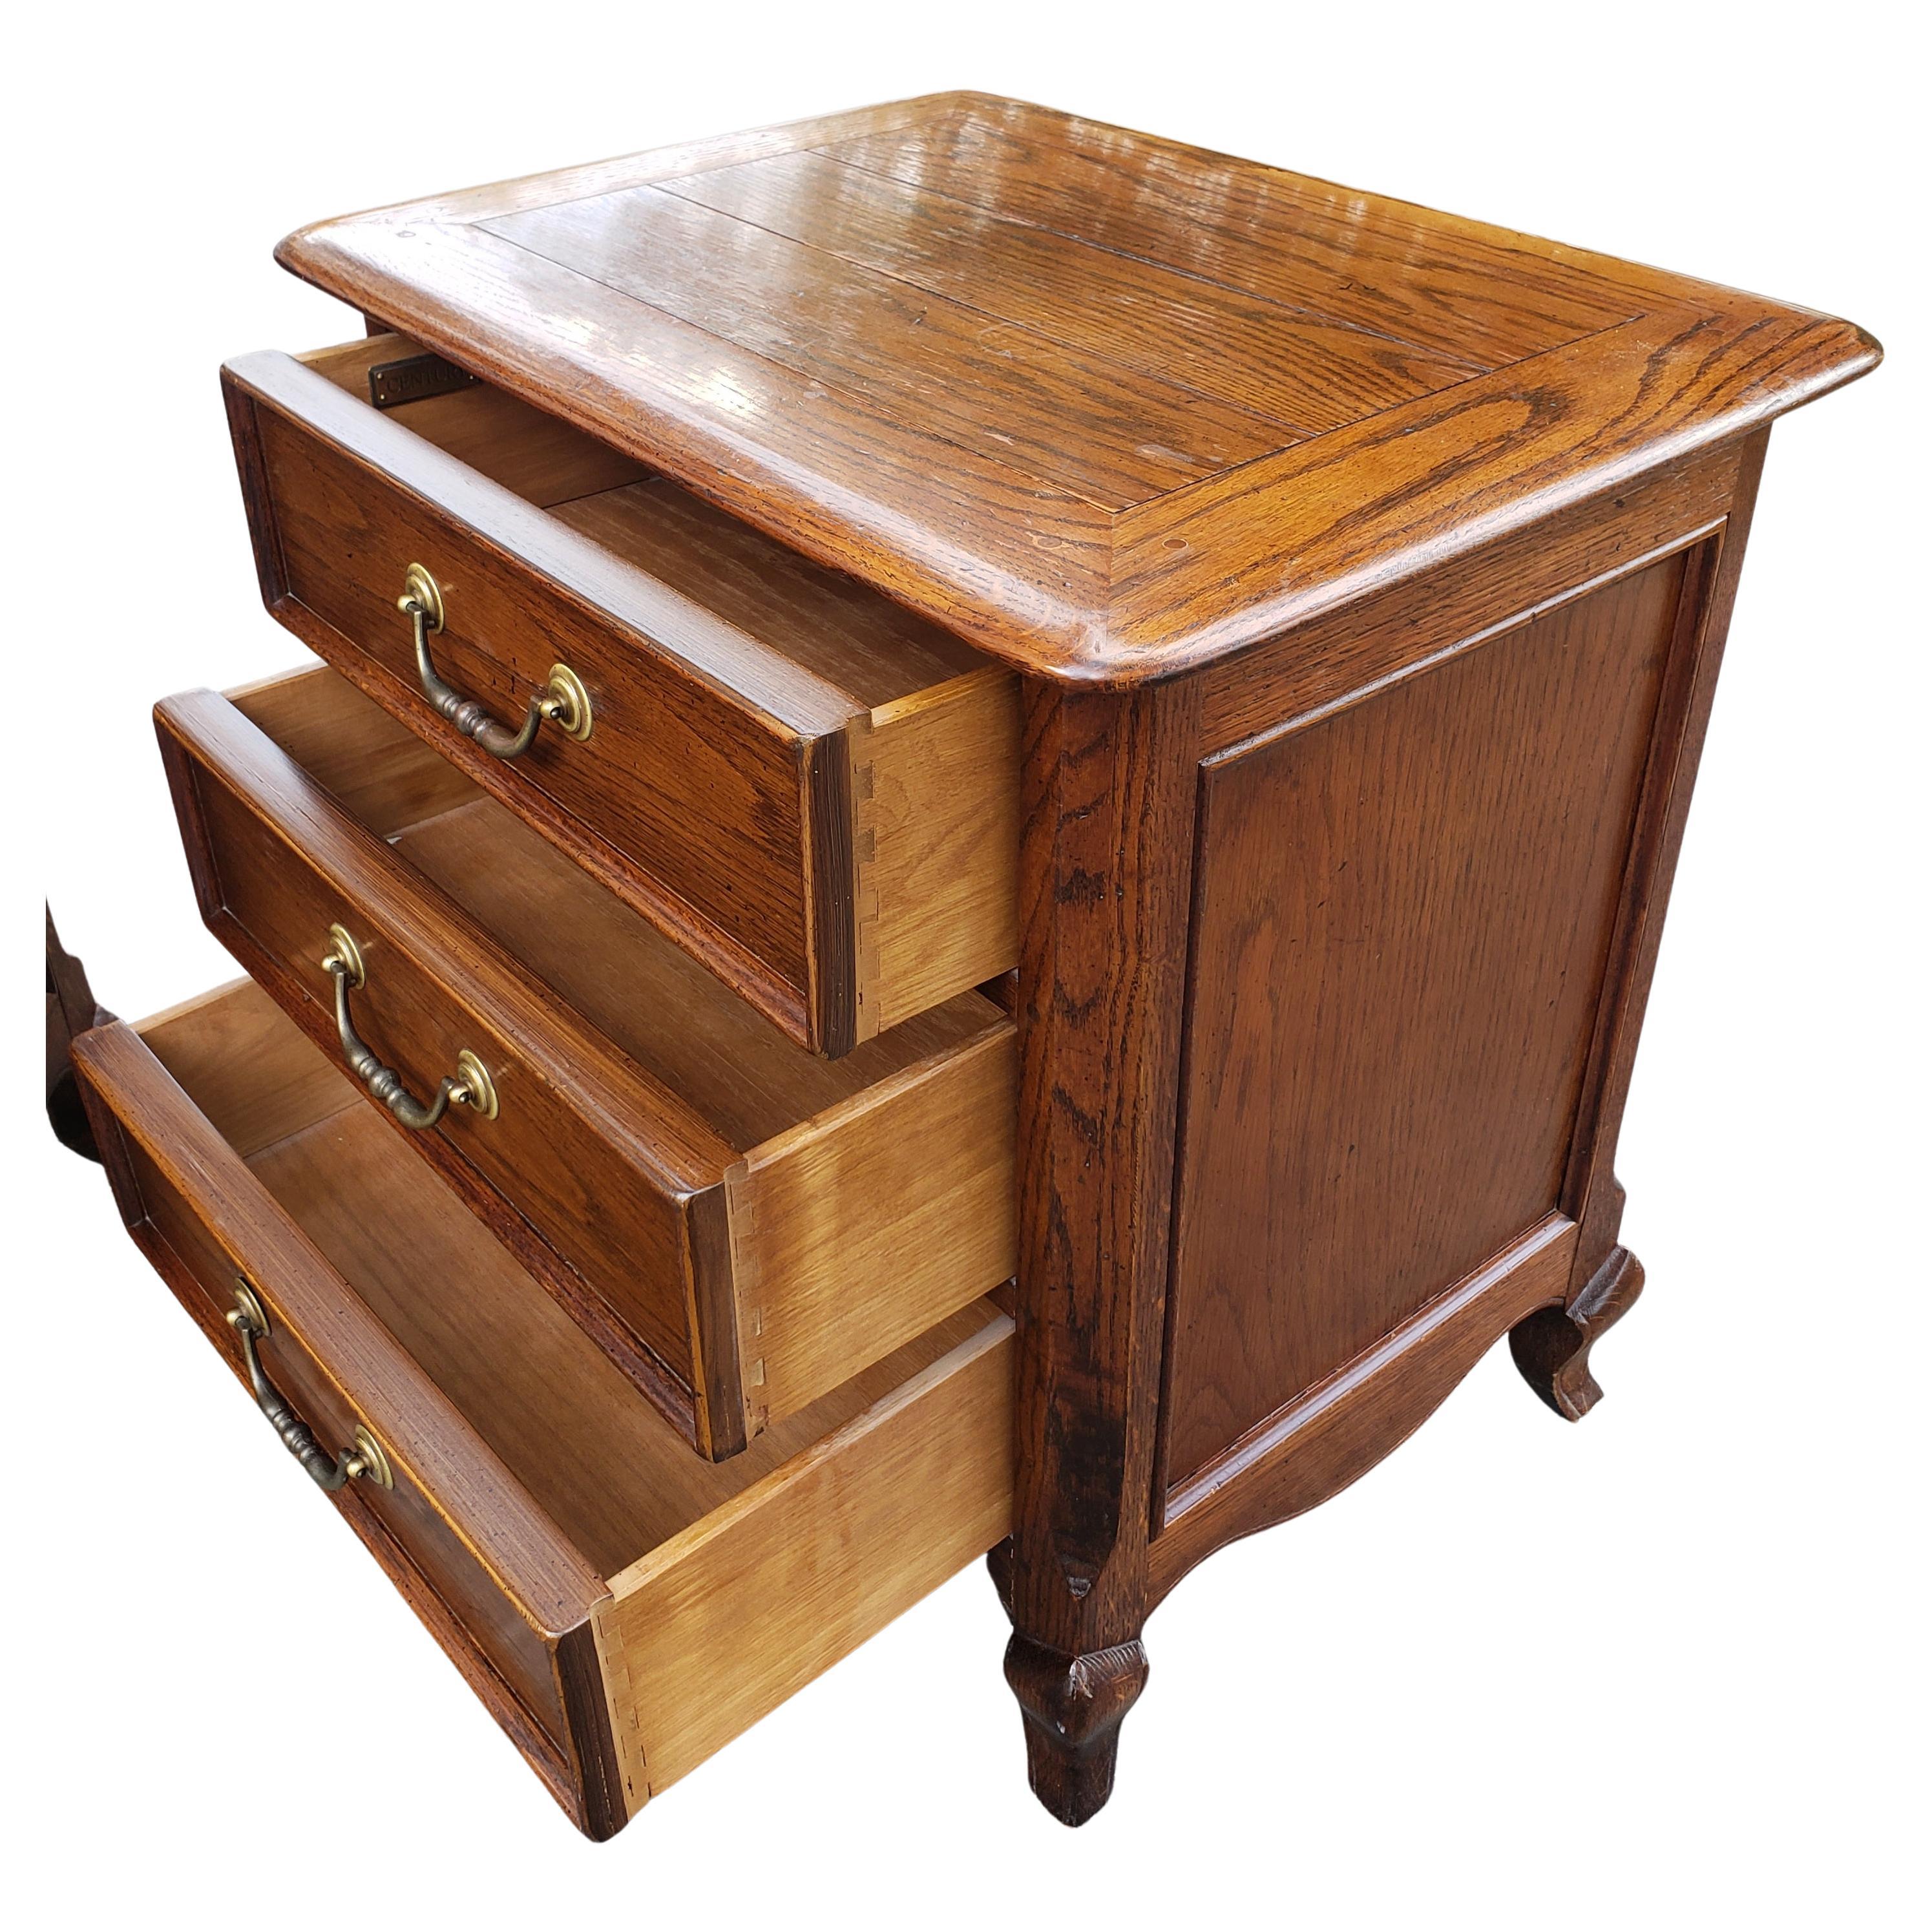 20th Century Century Furniture French Country Oak Bedside Chests of Drawers Nighstands, Pair